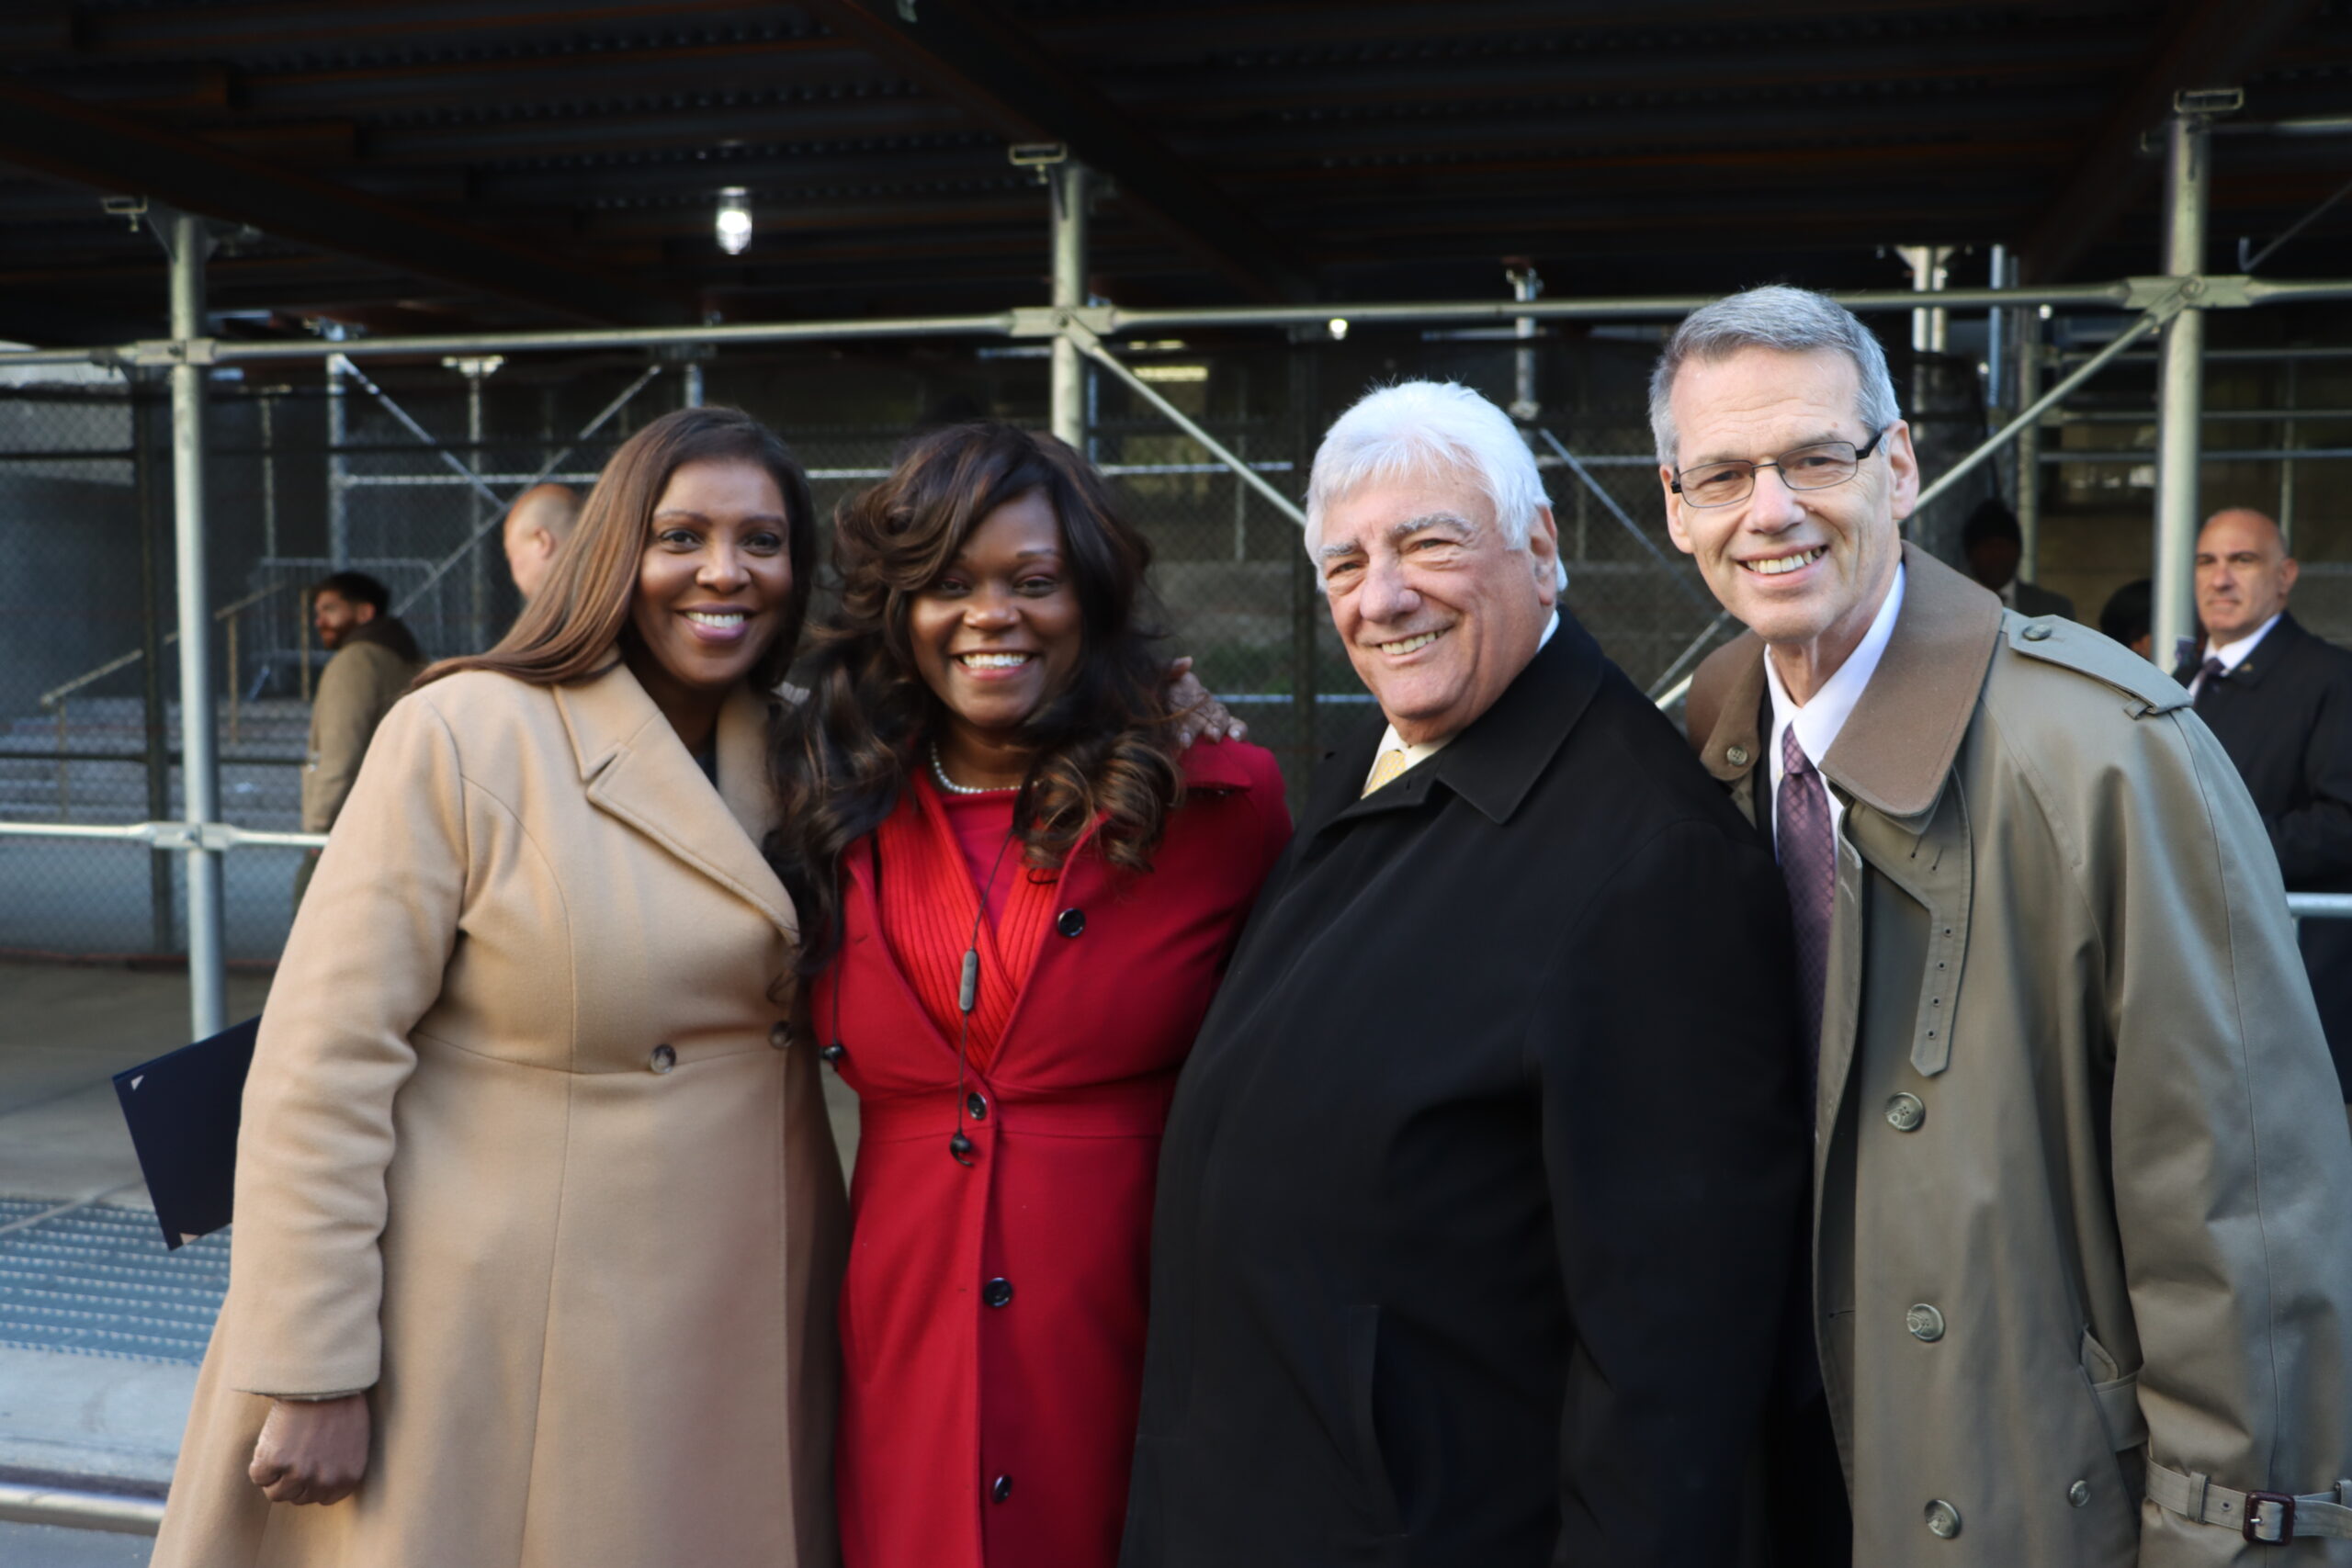 From left to right: Attorney General Letitia James, Assembly Member Rodneyse Bichotte Hermelyn, Hon. Frank Seddio and Hon. Lawrence Knipel, administrative judge of the Kings County Supreme Court, Civil Term at Dennis Quirk sendoff.